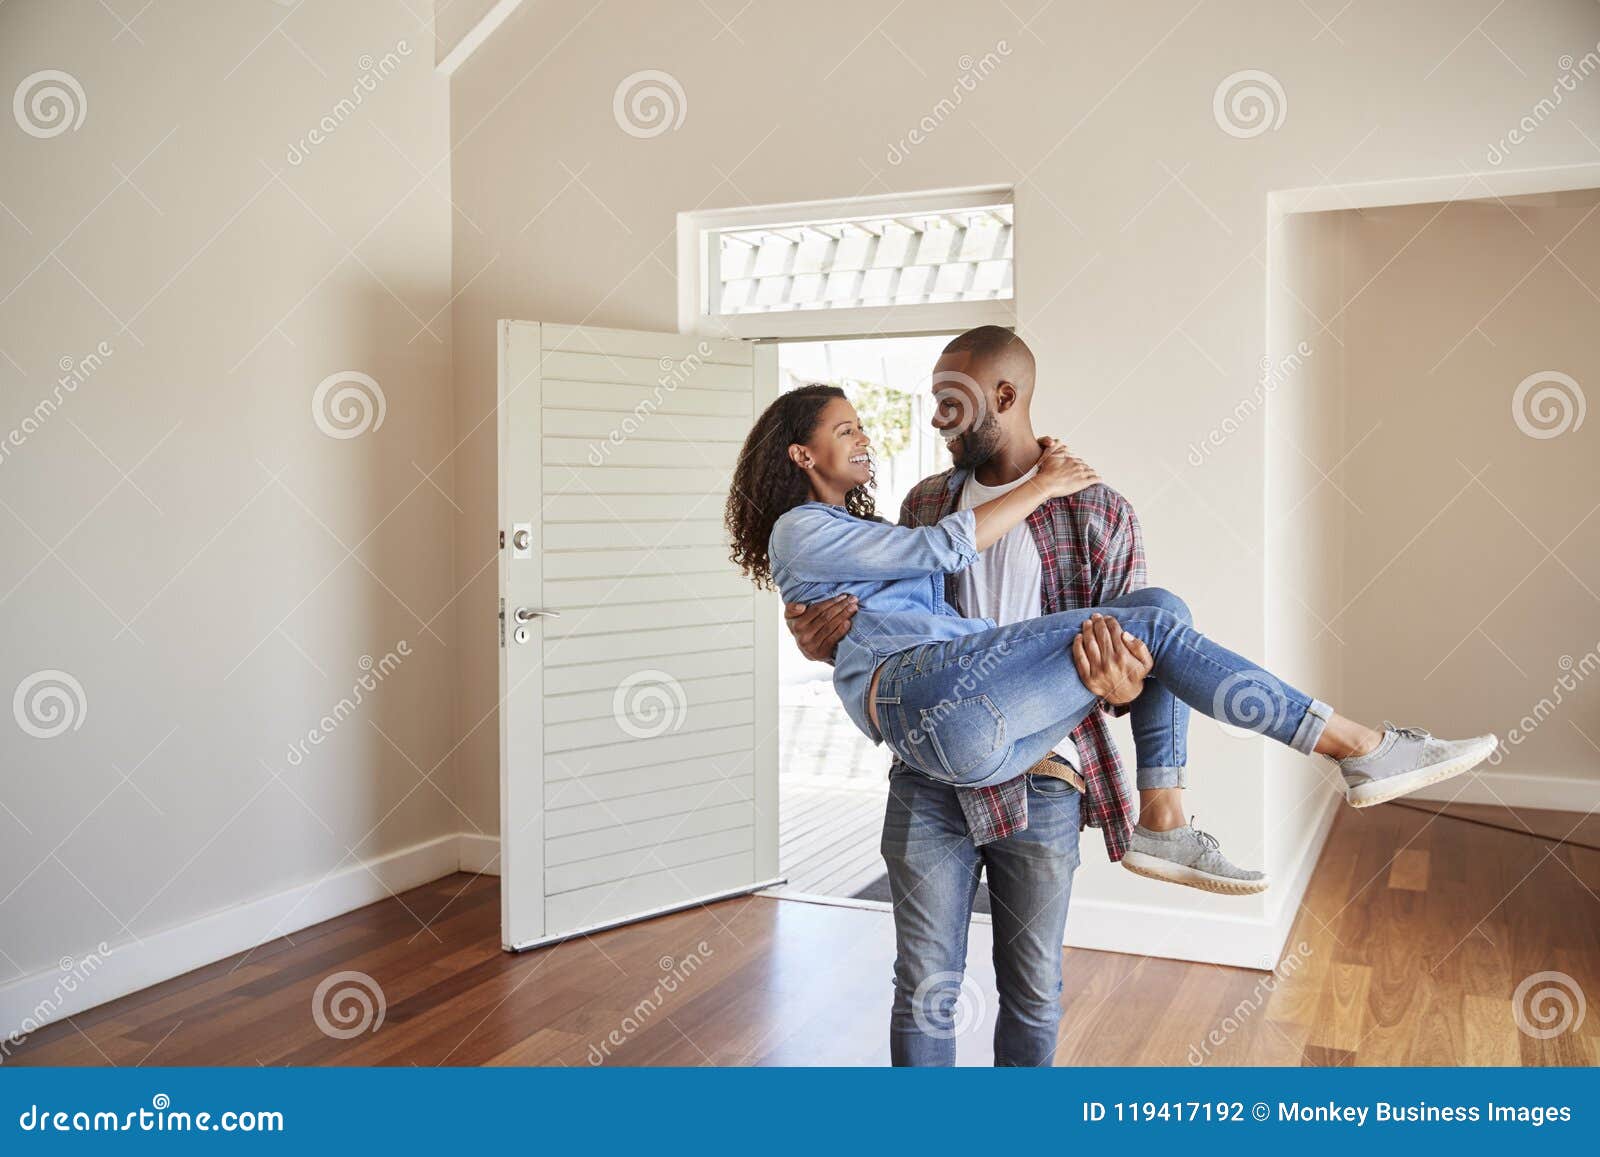 Man Carrying Woman Over Threshold Of Doorway In New Home Stock